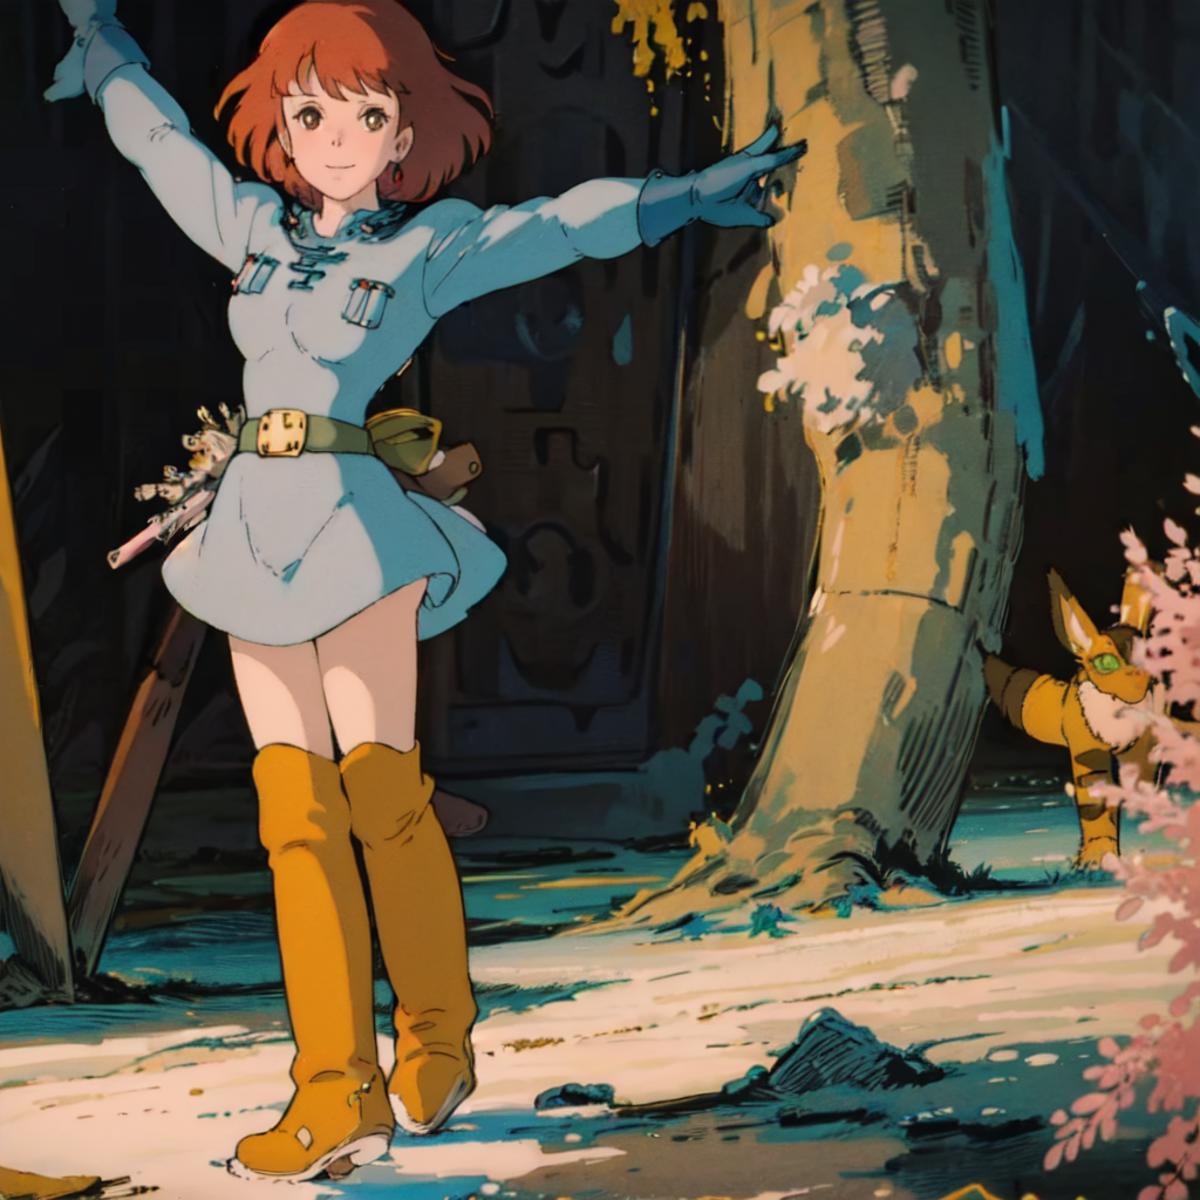 Ghibli - Nausicaa (Nausicaä of the Valley of the Wind (film)) image by ARCHEDamnit